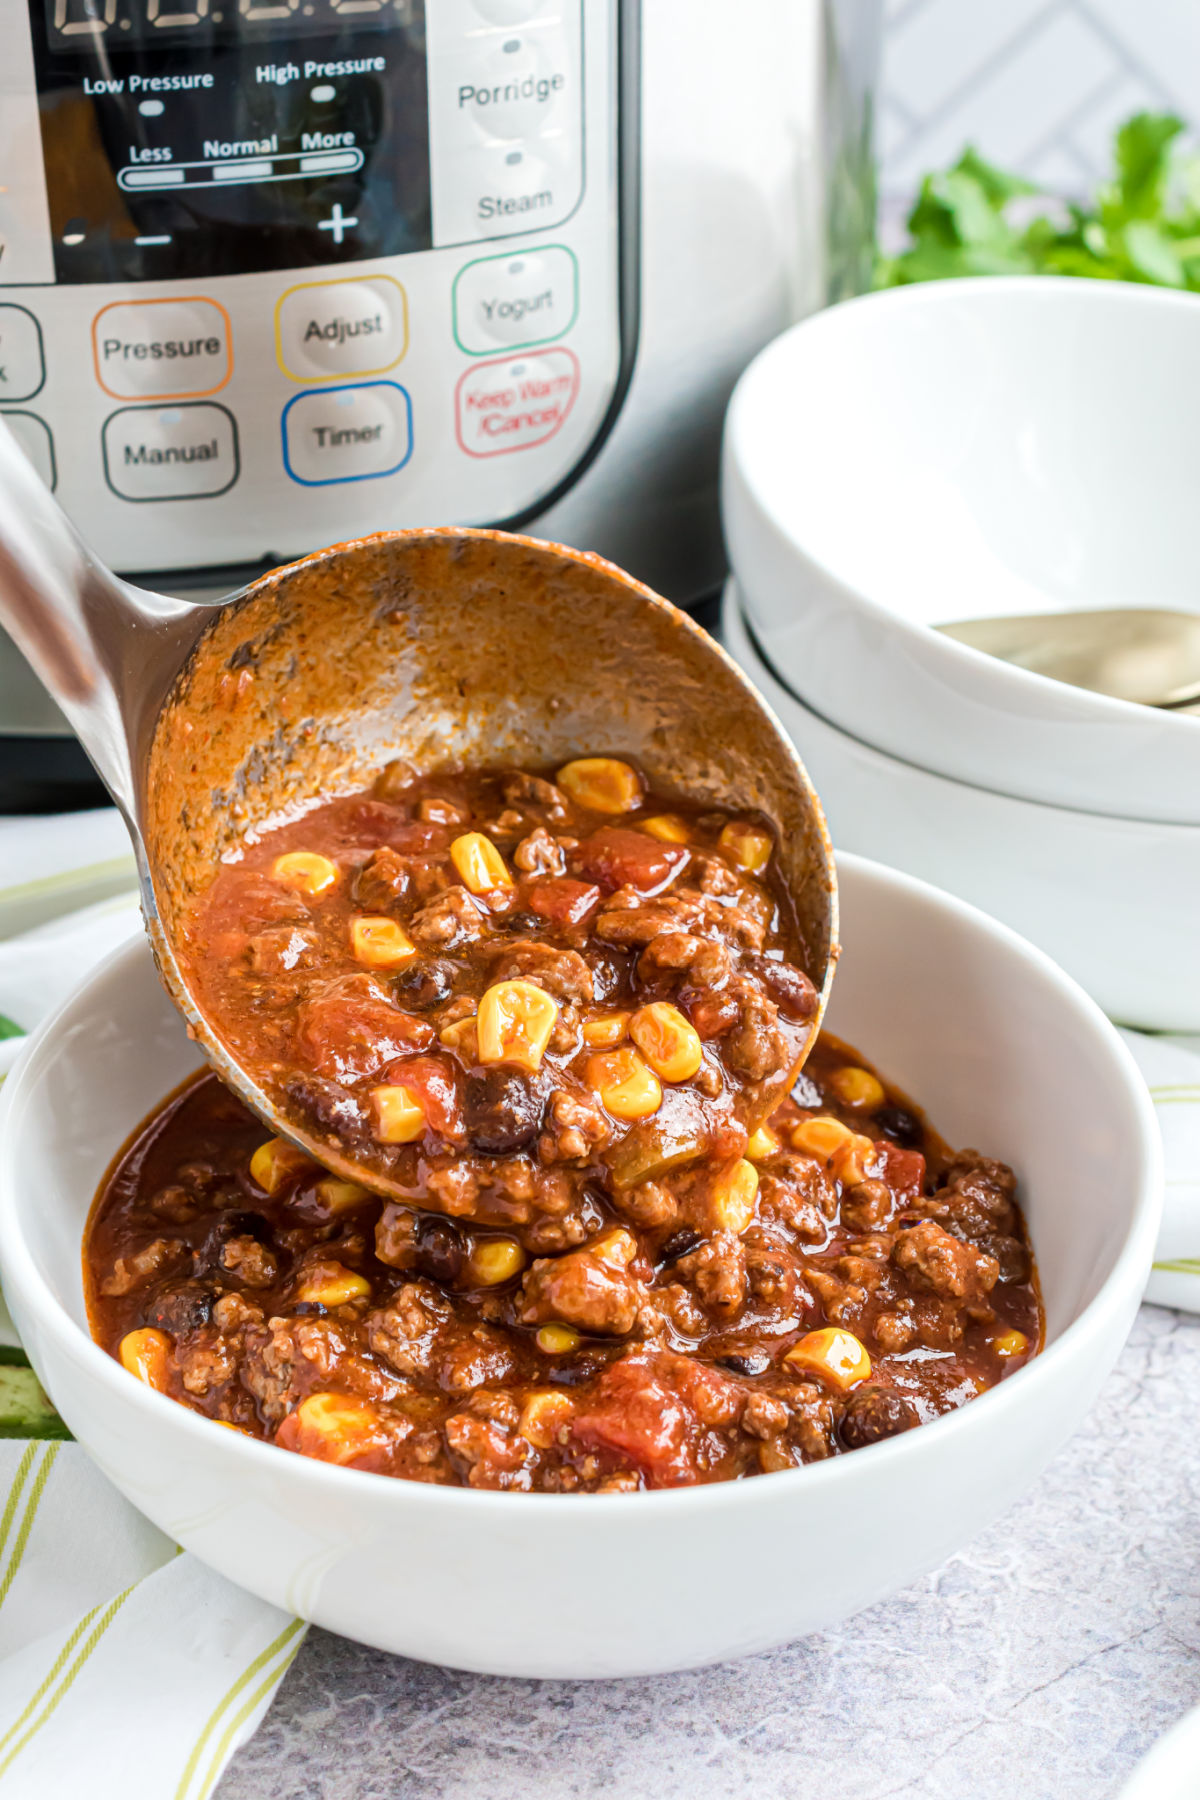 Taco chili made in the pressure cooker and being ladled into a serving bowl.